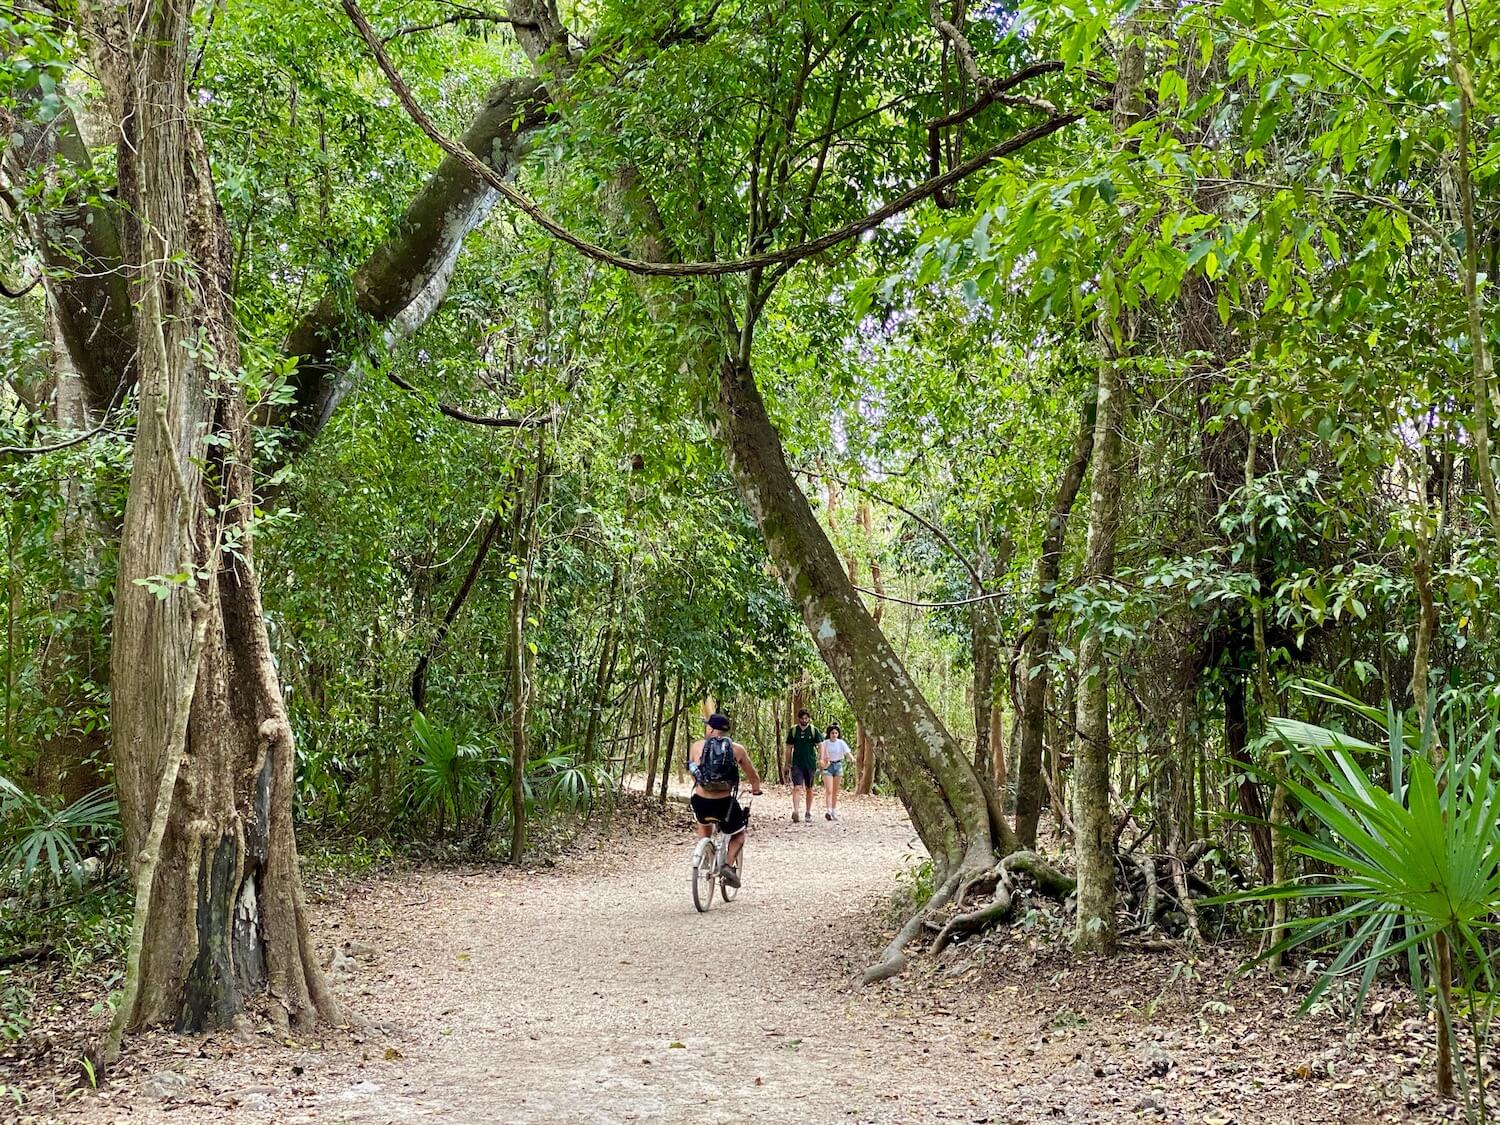 A shirtless man wearing a black back pack cycles on a bike under the thick canopy of jungle on a pathway traversing the vast Coba Ruins. The trees are lush green but the path and forest floor are very dry and dusty. In the background a male and female couple hold hands walking towards the camera.